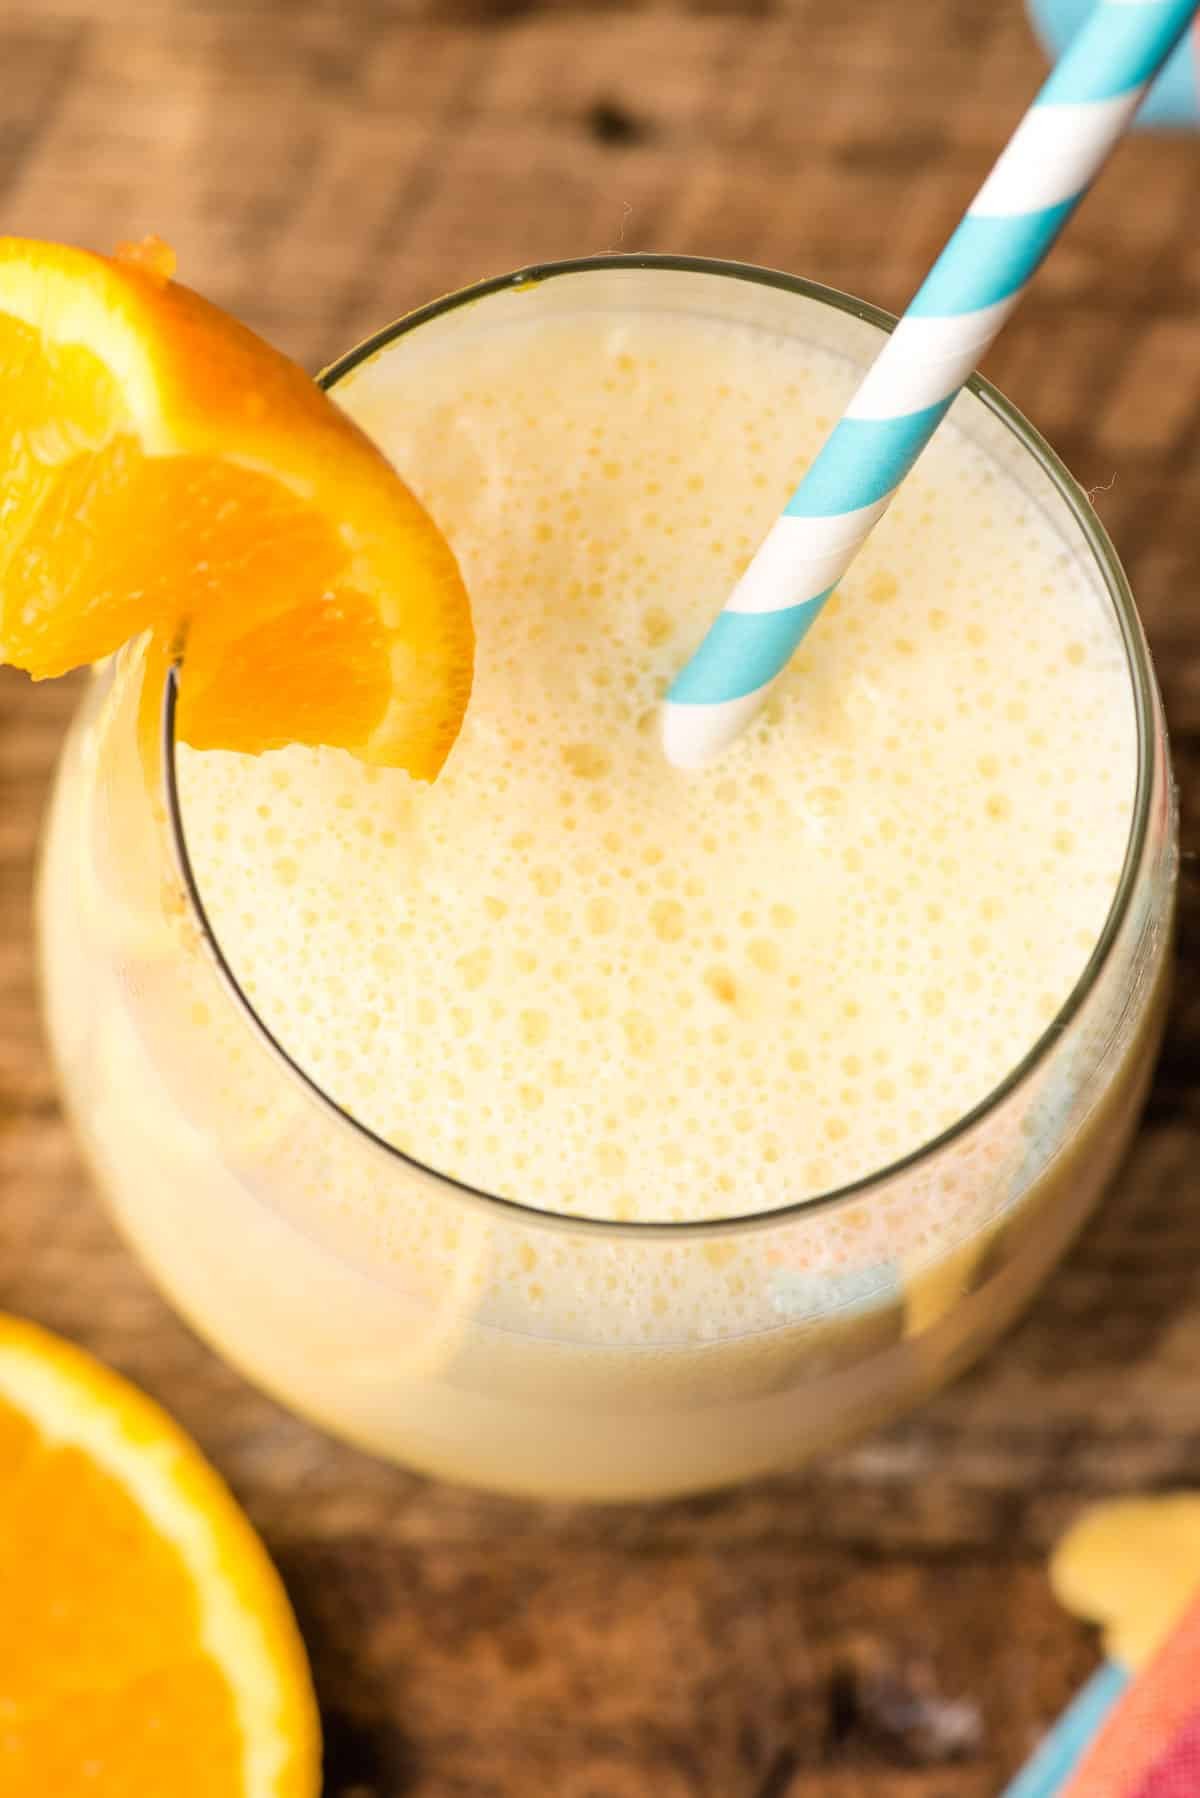 Frothy top of a glass of orange julius, with a blue and white striped straw stuck in it.